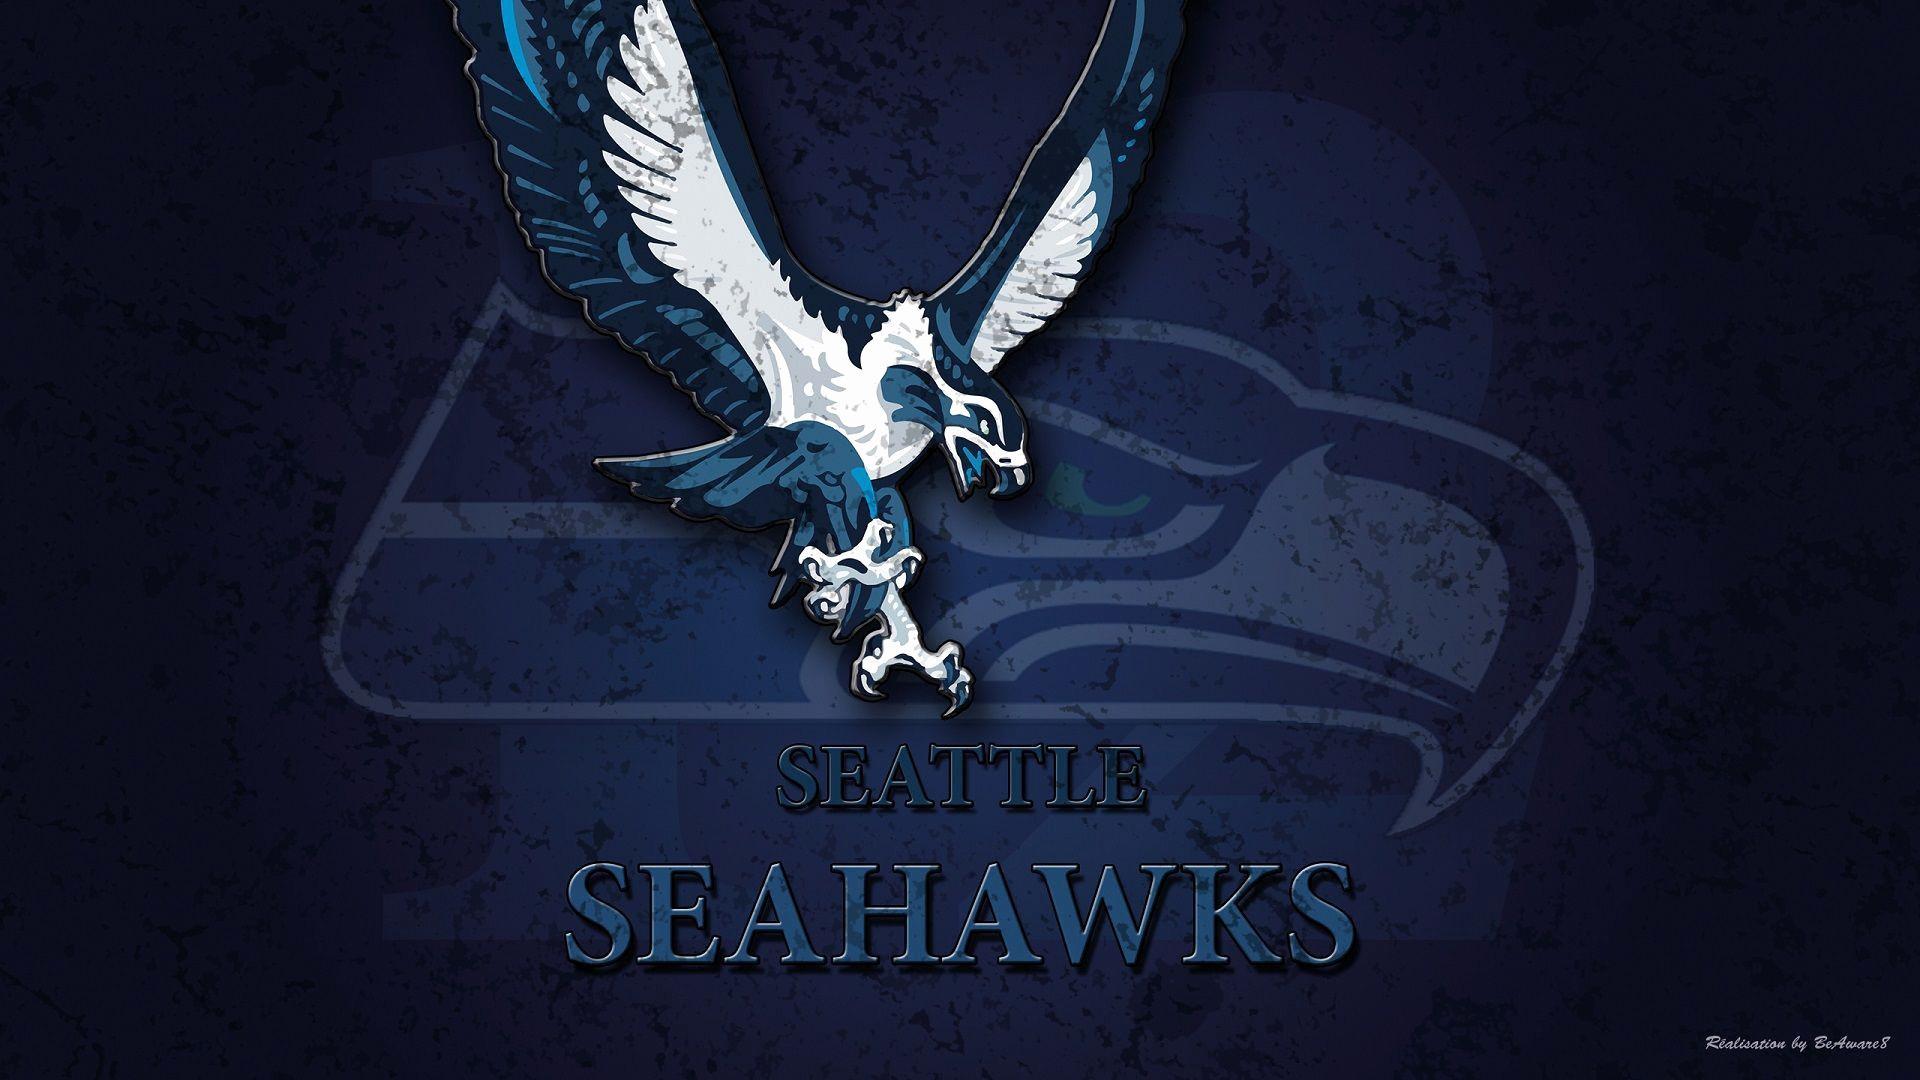 Seattle Seahawks Wallpaper background picture